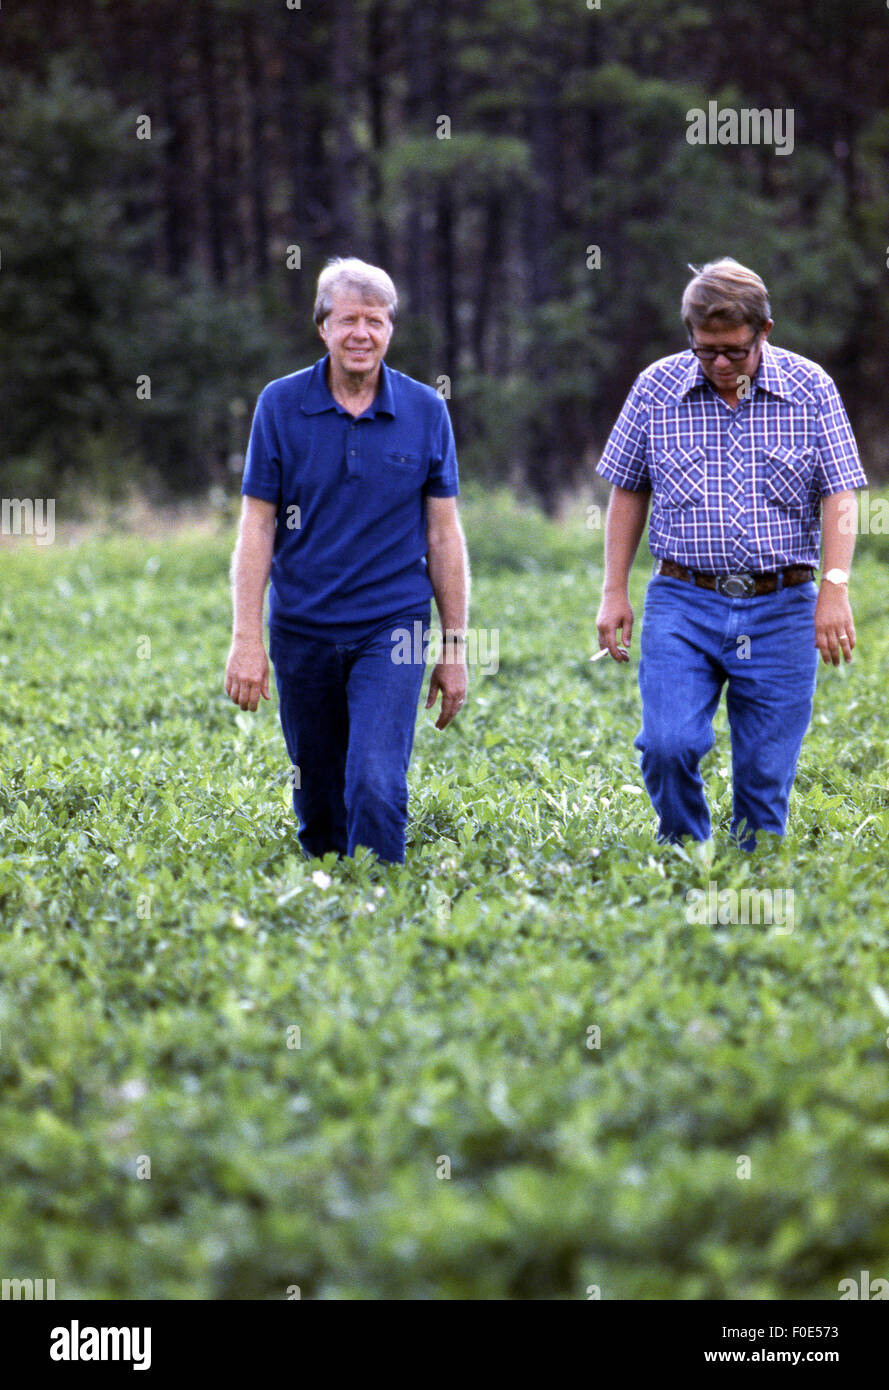 Nov. 11, 2014 - President Jimmy Carter and his brother Billy Carter are joined by a tenant farmer as they assess their summer peanut crop. The Carters own tracts of farmland around Plains, Georgia along with a peanut warehouse in that city, although the President's holdings are held in a blind trust during his presidency. (Credit Image: © Ken Hawkins via ZUMA Wire) Stock Photo